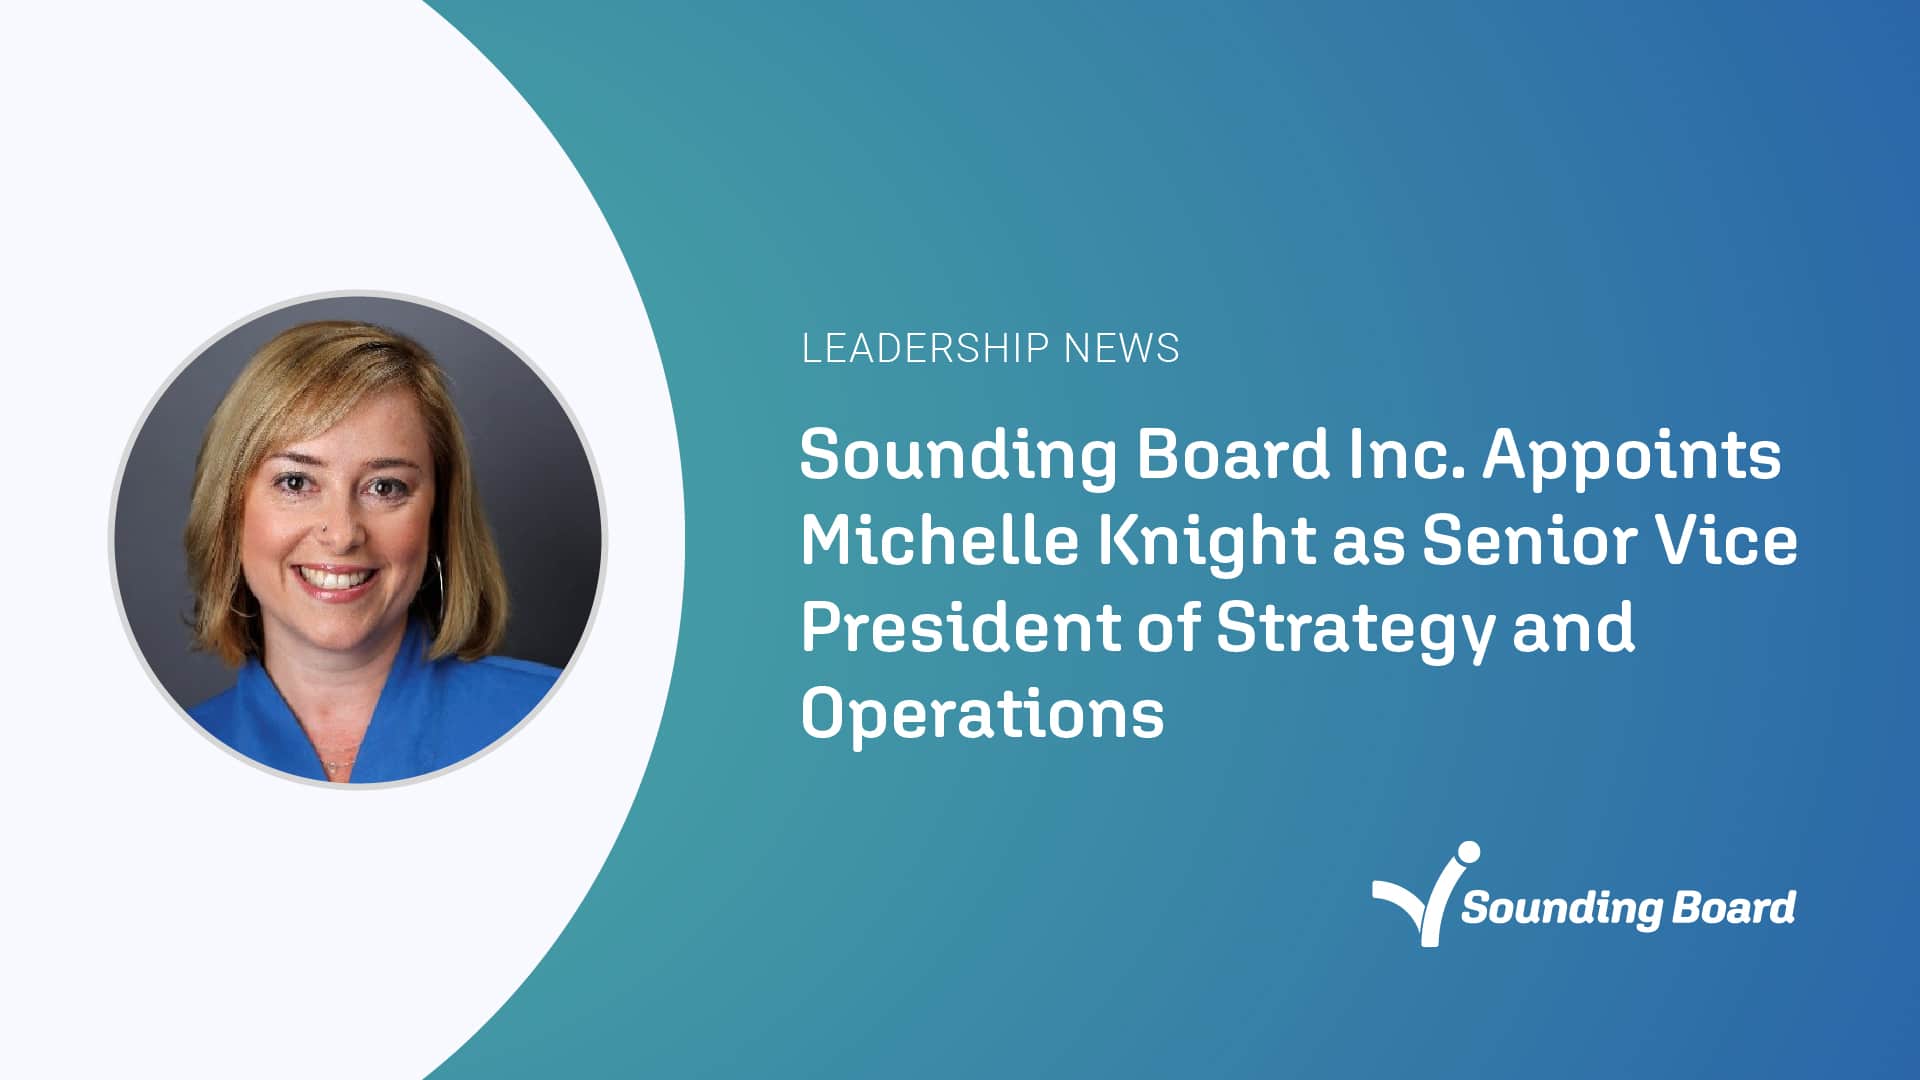 Sounding Board Inc. Appoints Michelle Knight as Senior Vice President of Strategy and Operations 1